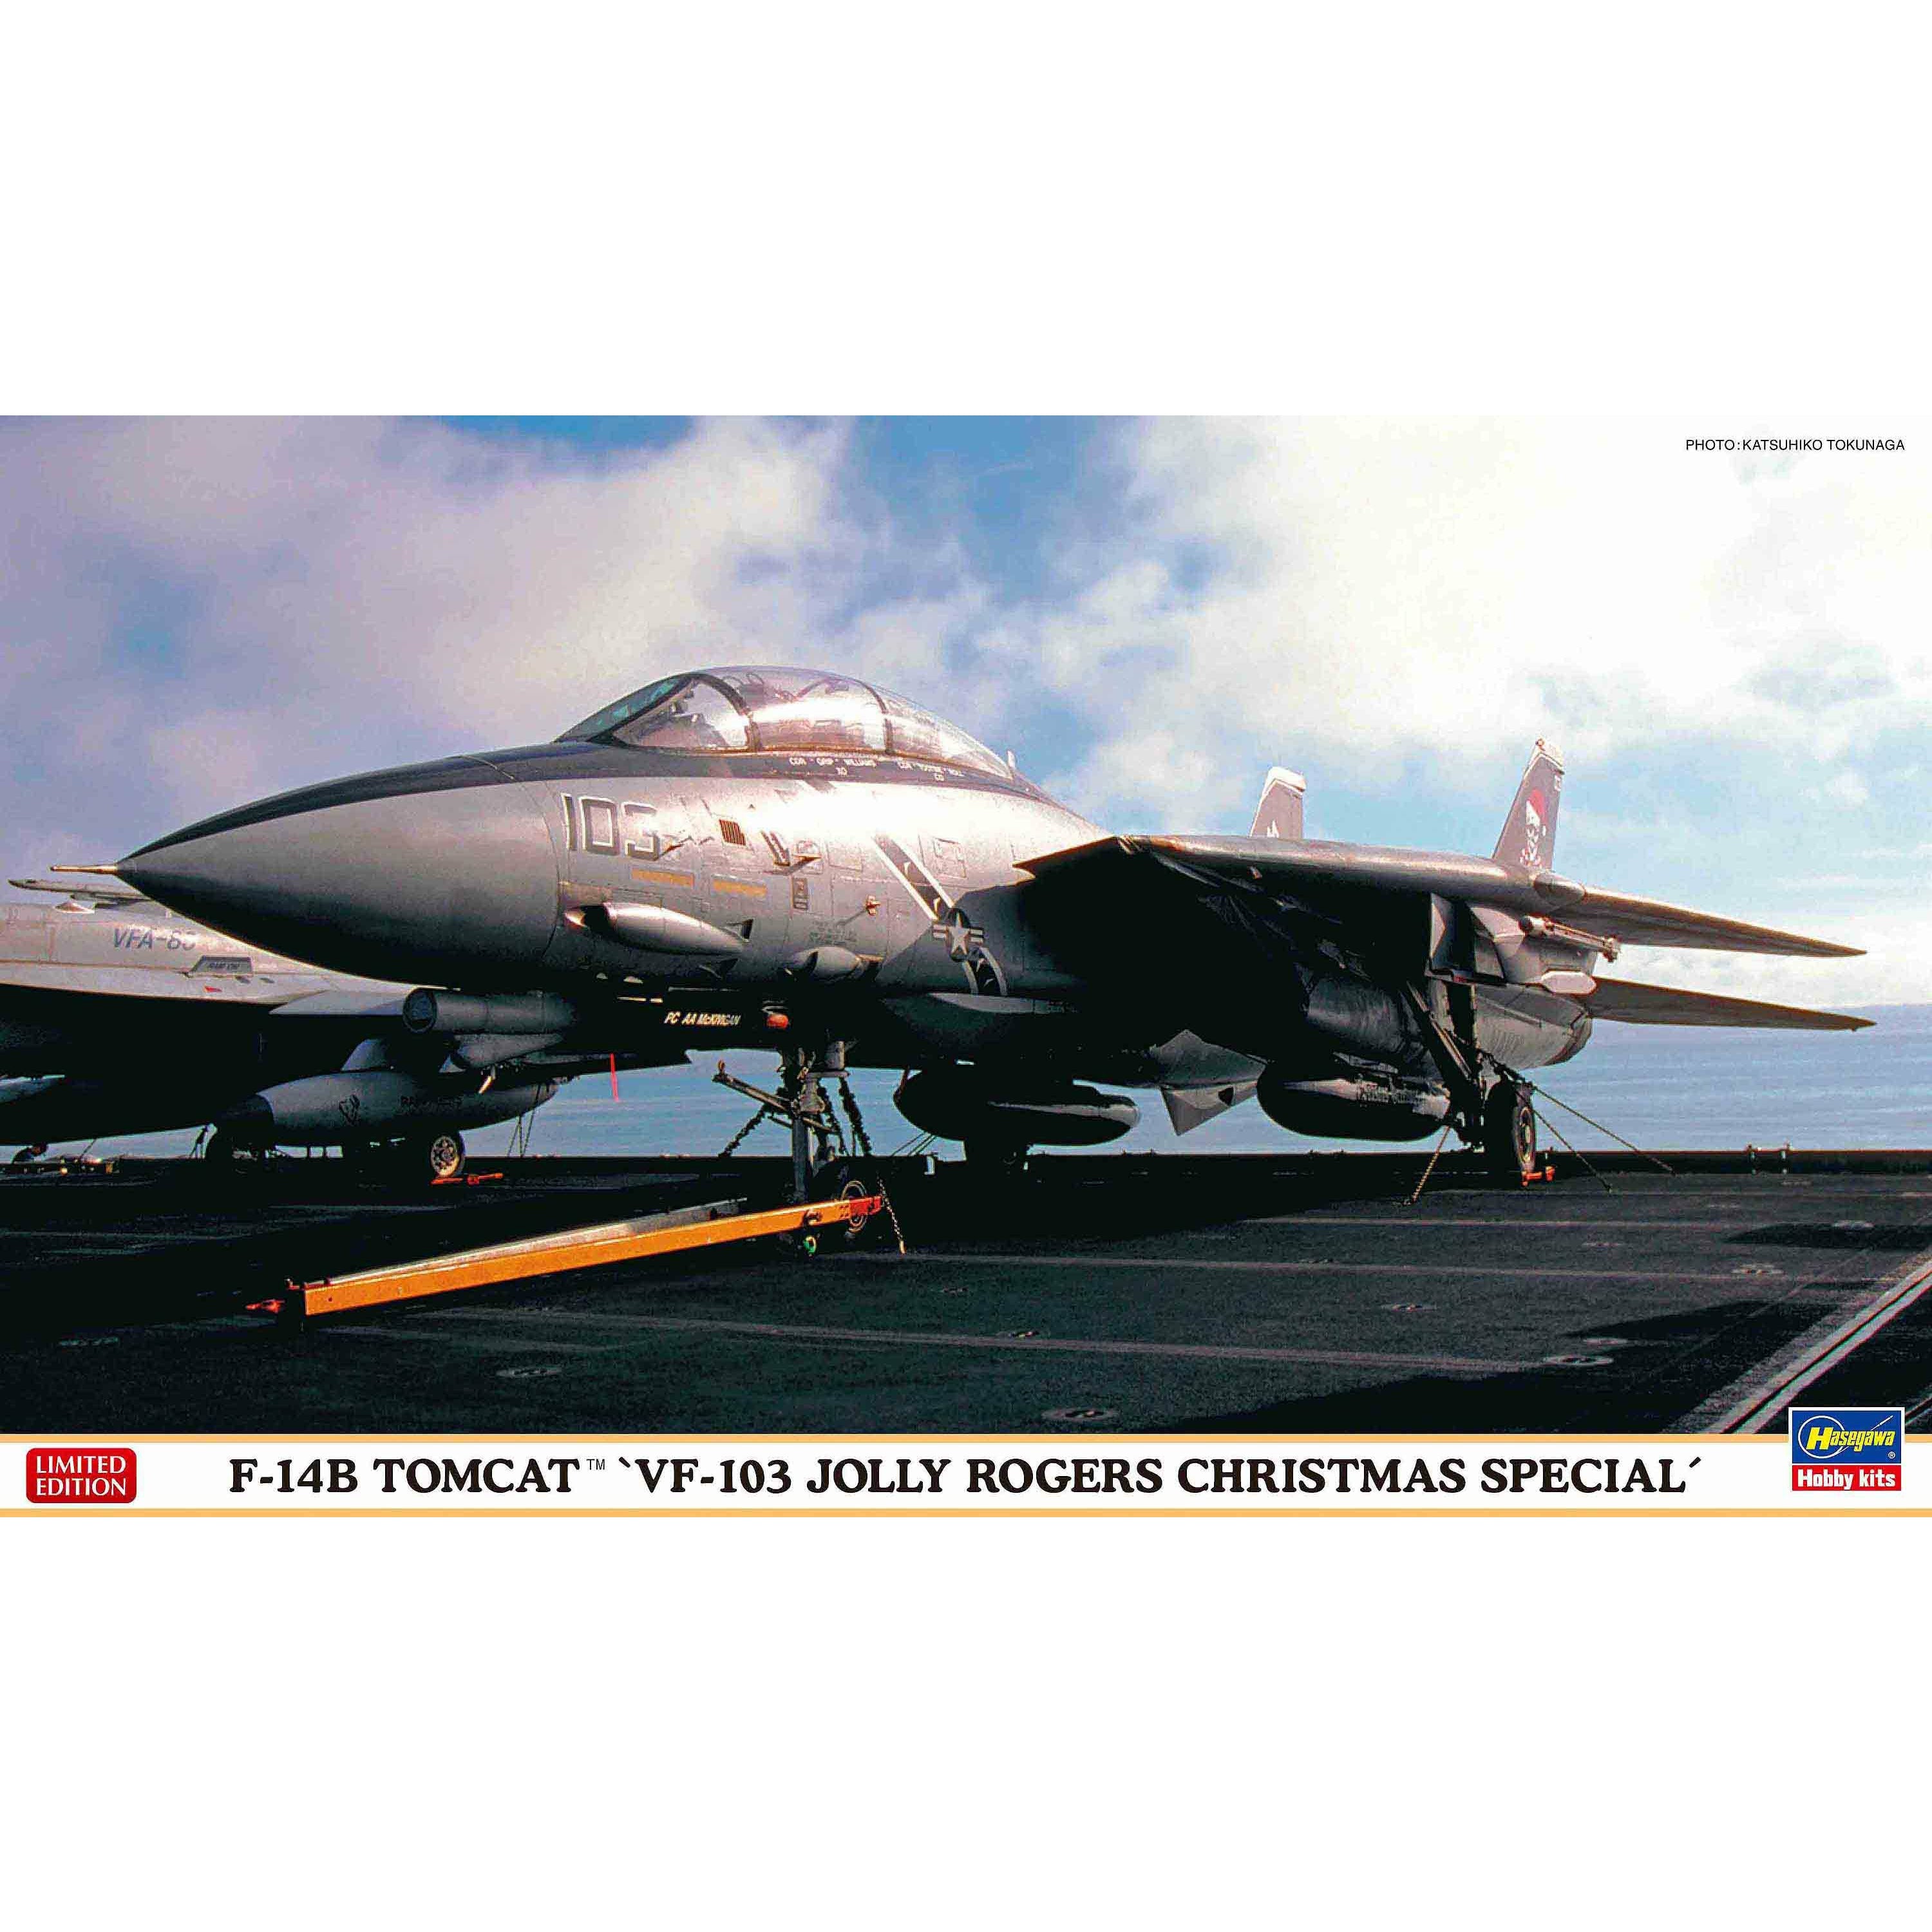 F-14B Tomcat 'VF-103 Jolly Rogers Christmas Special' 1/72 #2391 by Hasegawa